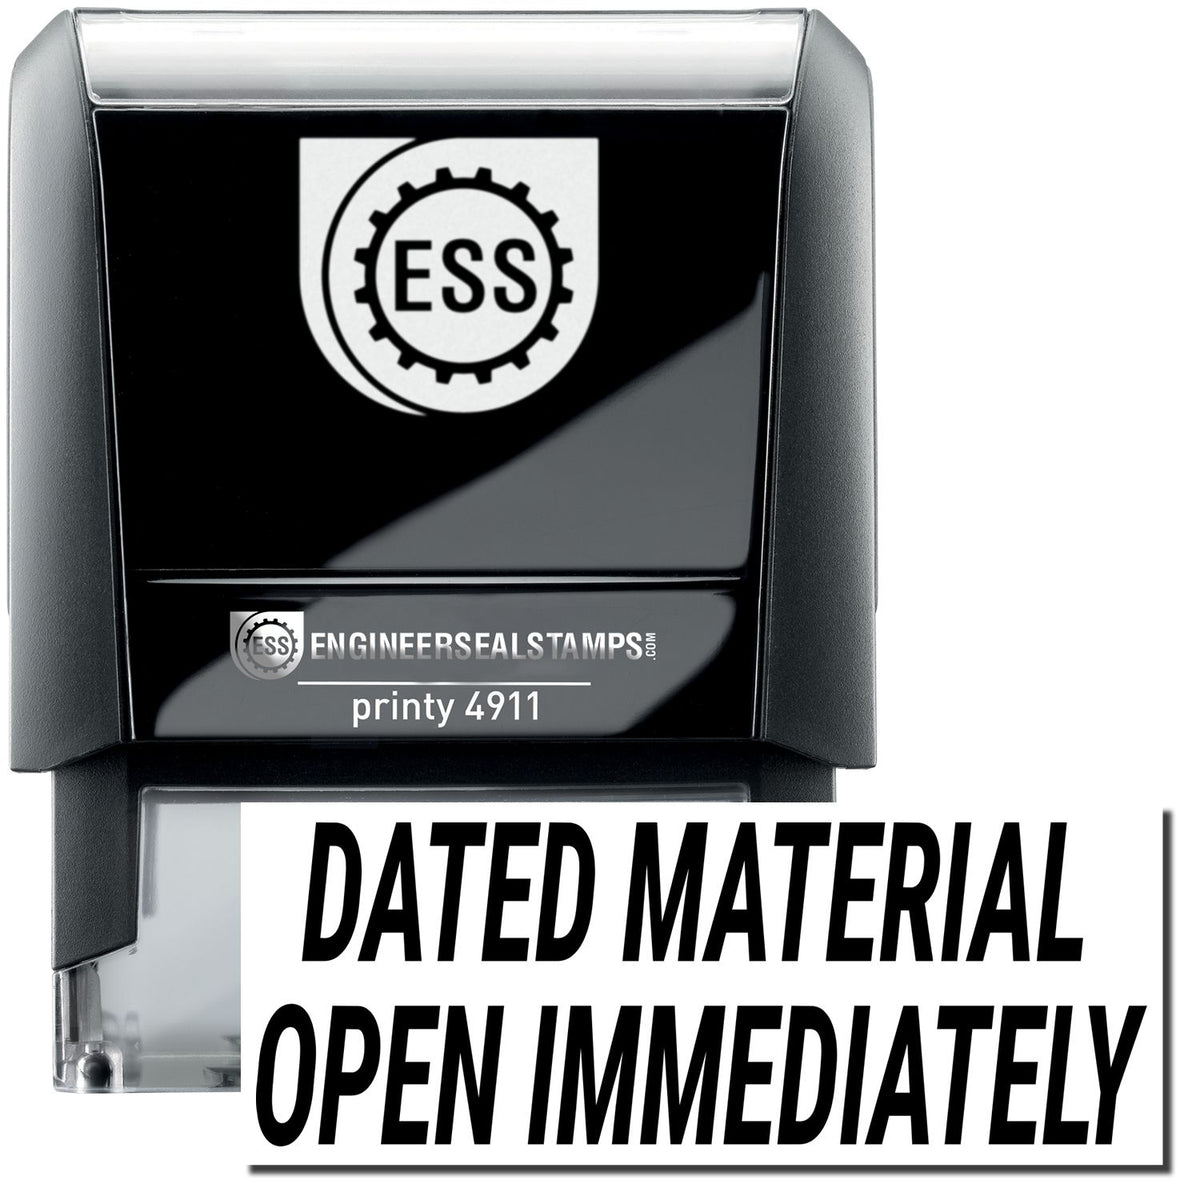 A self-inking stamp with a stamped image showing how the word &quot;DATED MATERIAL OPEN IMMEDIATELY&quot; in bold font is displayed after stamping.